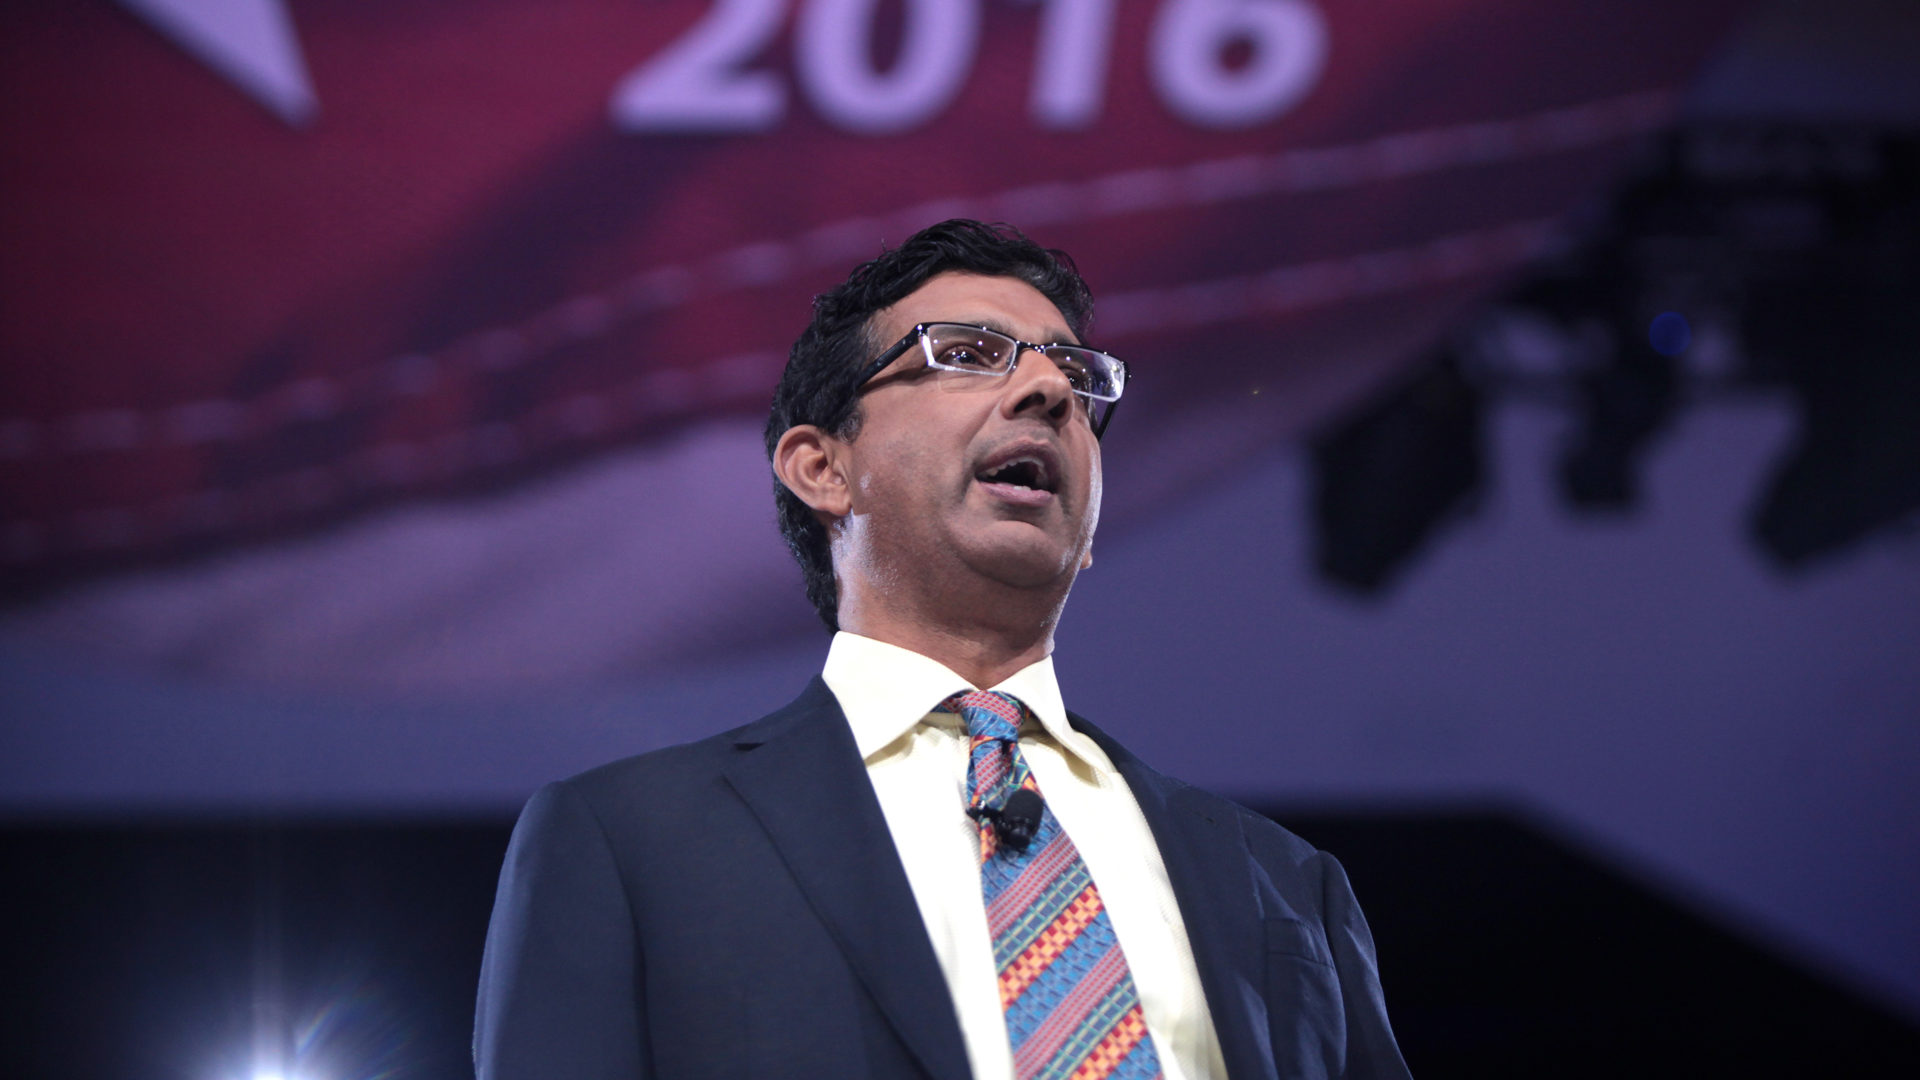 Dinesh D'Souza speaking at the 2016 Conservative Political Action Conference (CPAC) in National Harbor, Maryland.